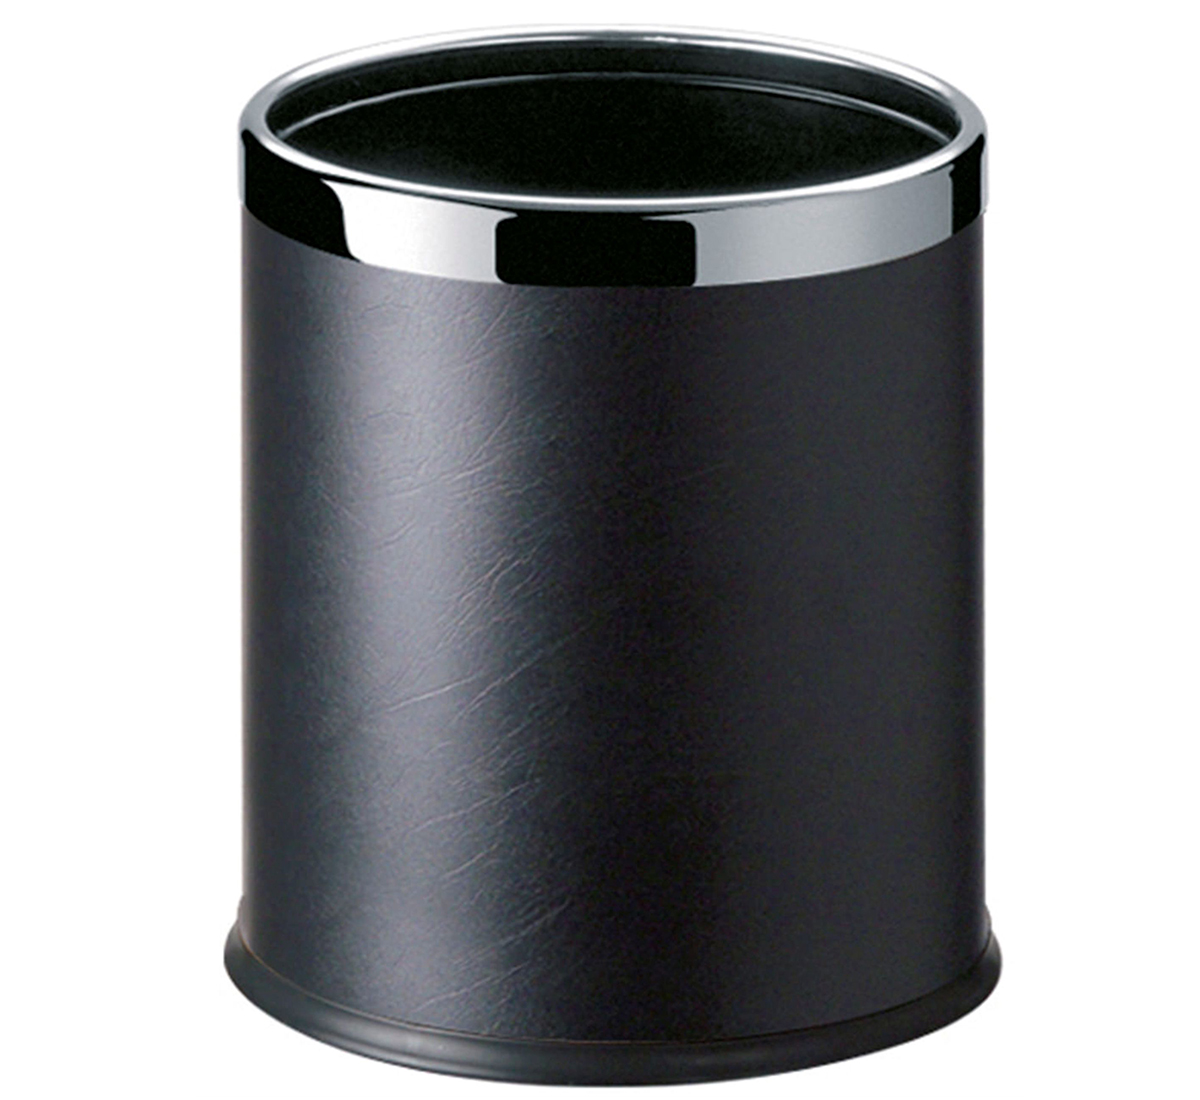 Brown round room dustbin with open top